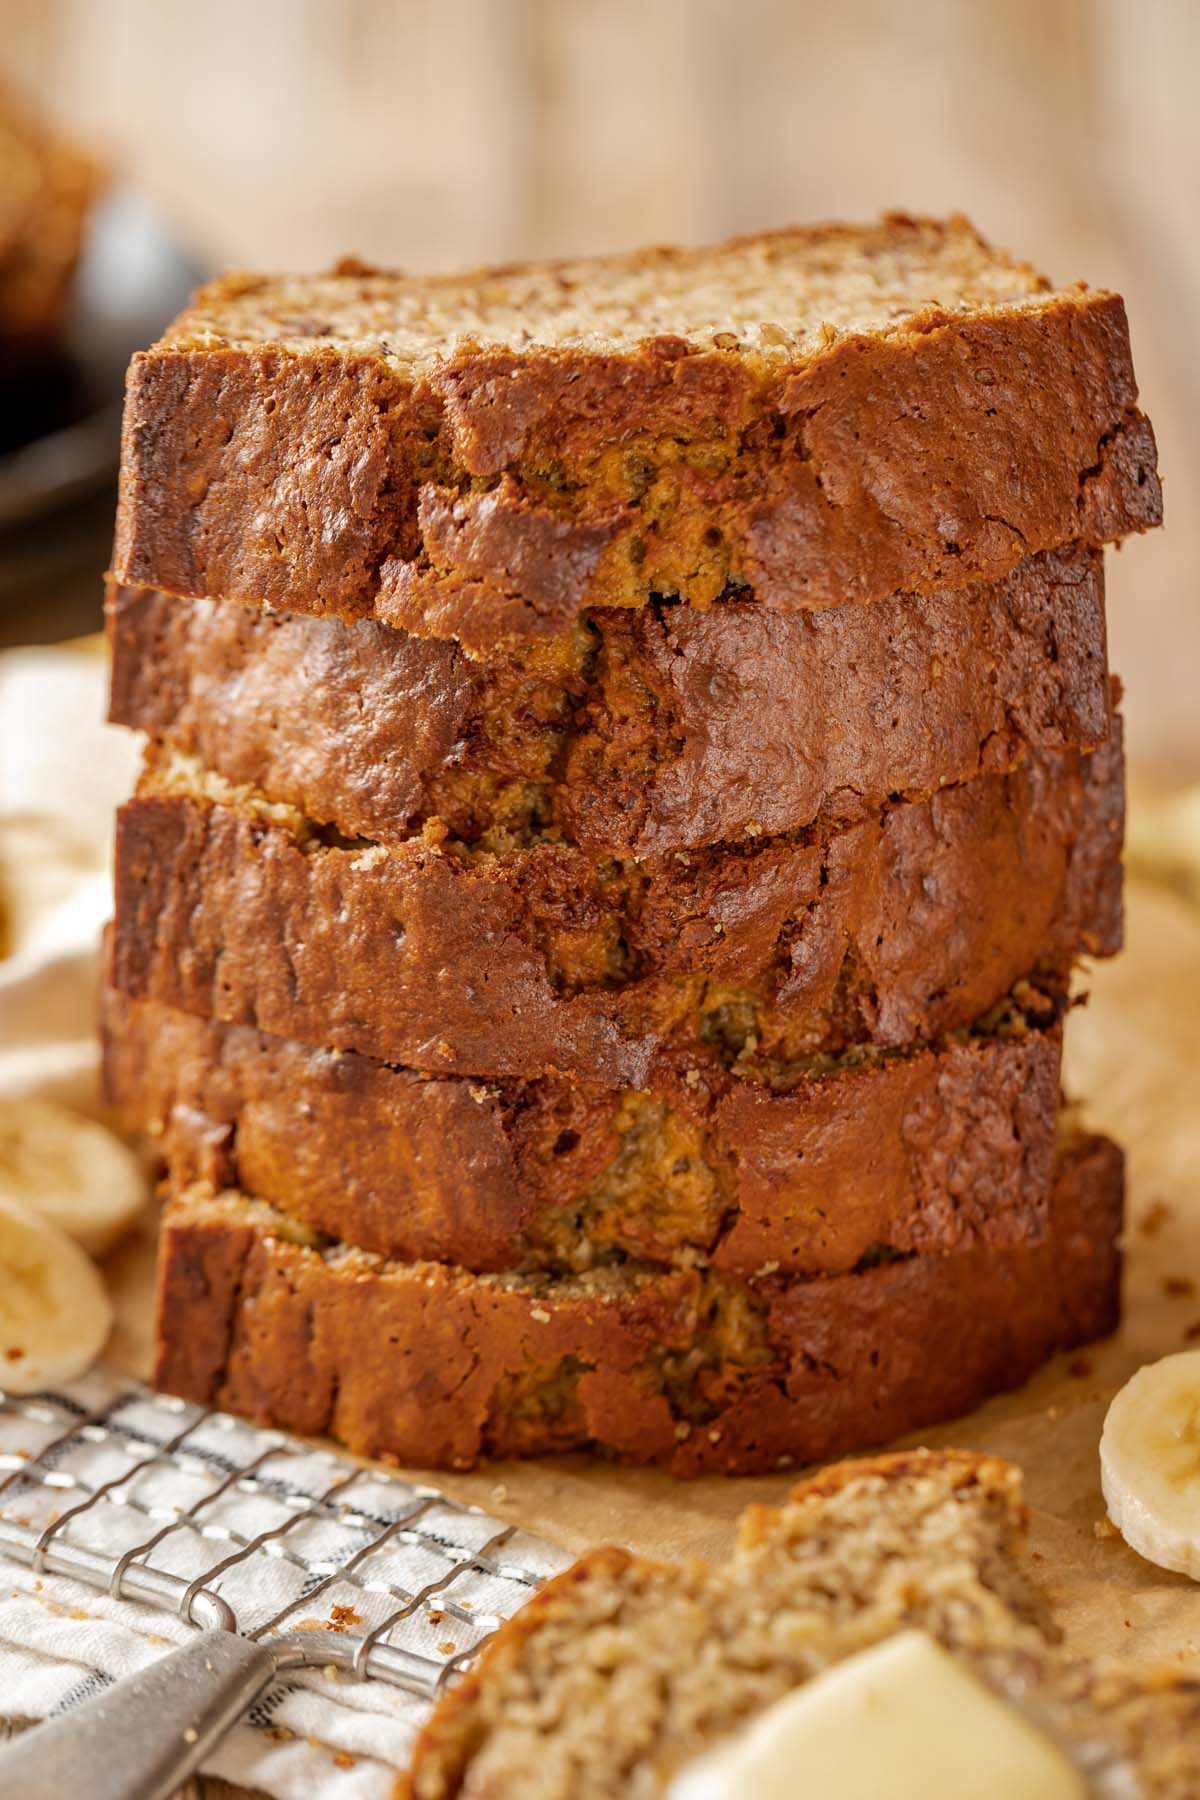 What is Bread Anyway? Banana Cake vs Banana Bread Compared - ChainBaker